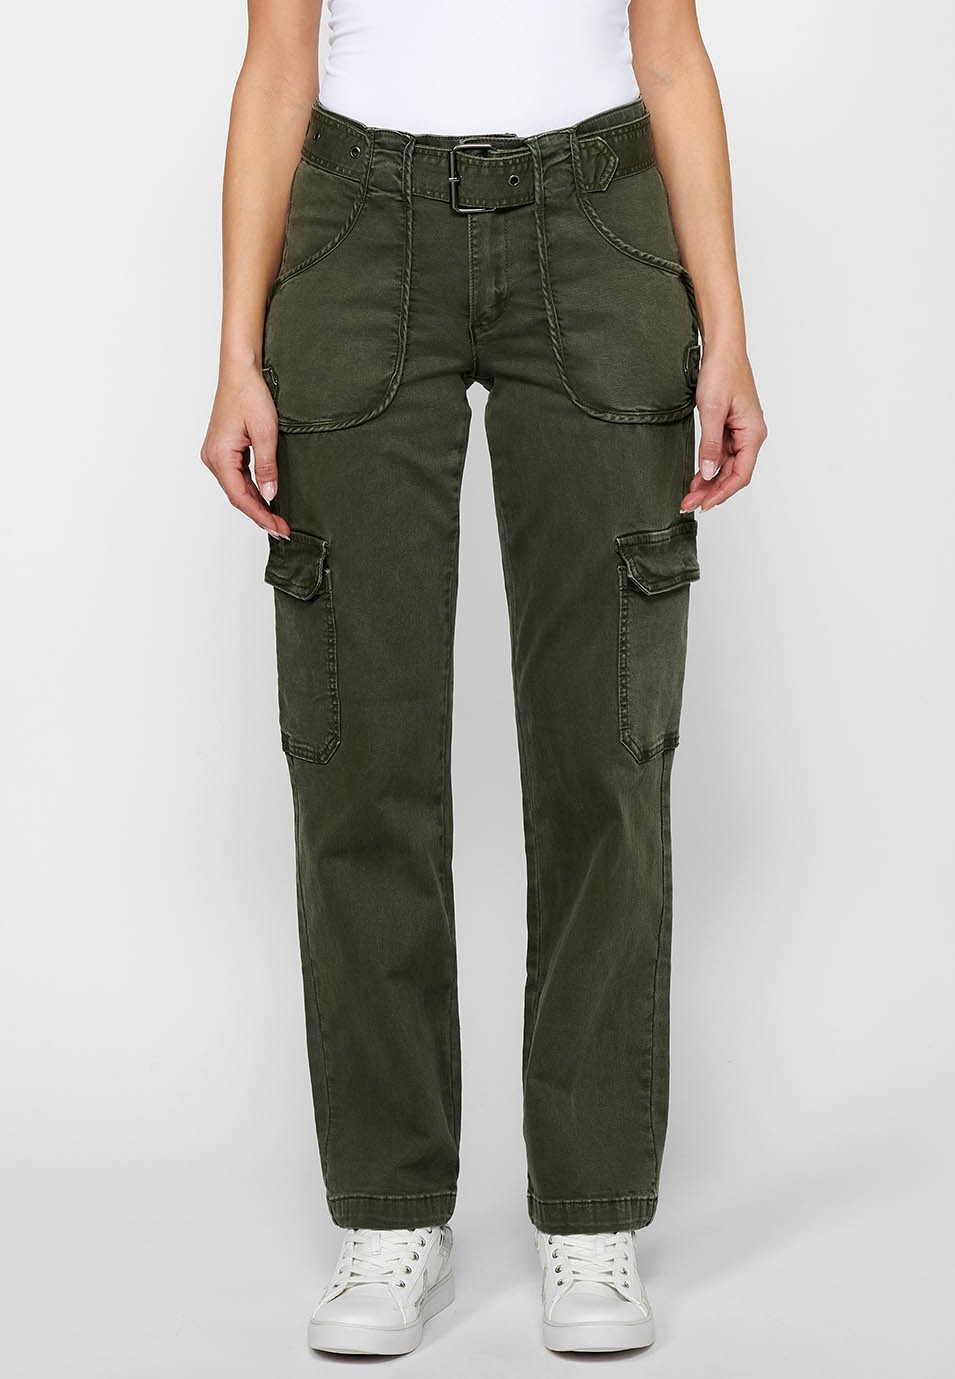 Long straight-cut pants with front zipper closure and button with patch pockets in Khaki Color for Women 4